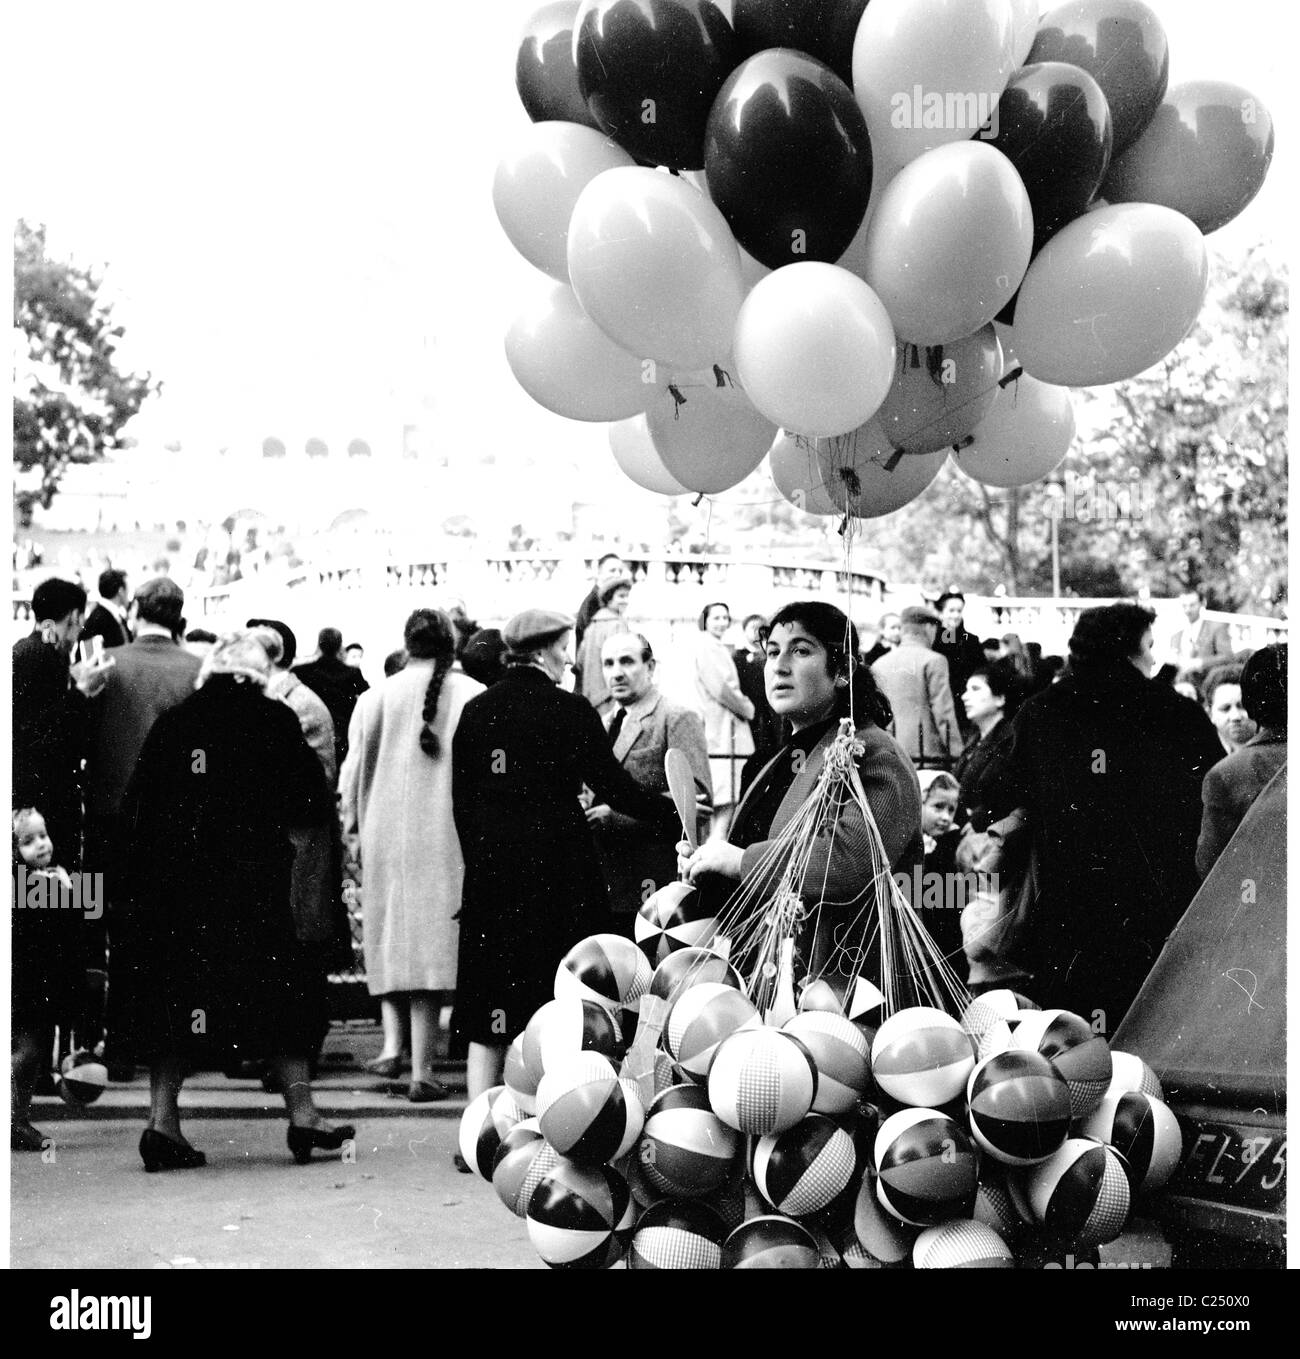 Ballons Black and White Stock Photos & Images - Alamy